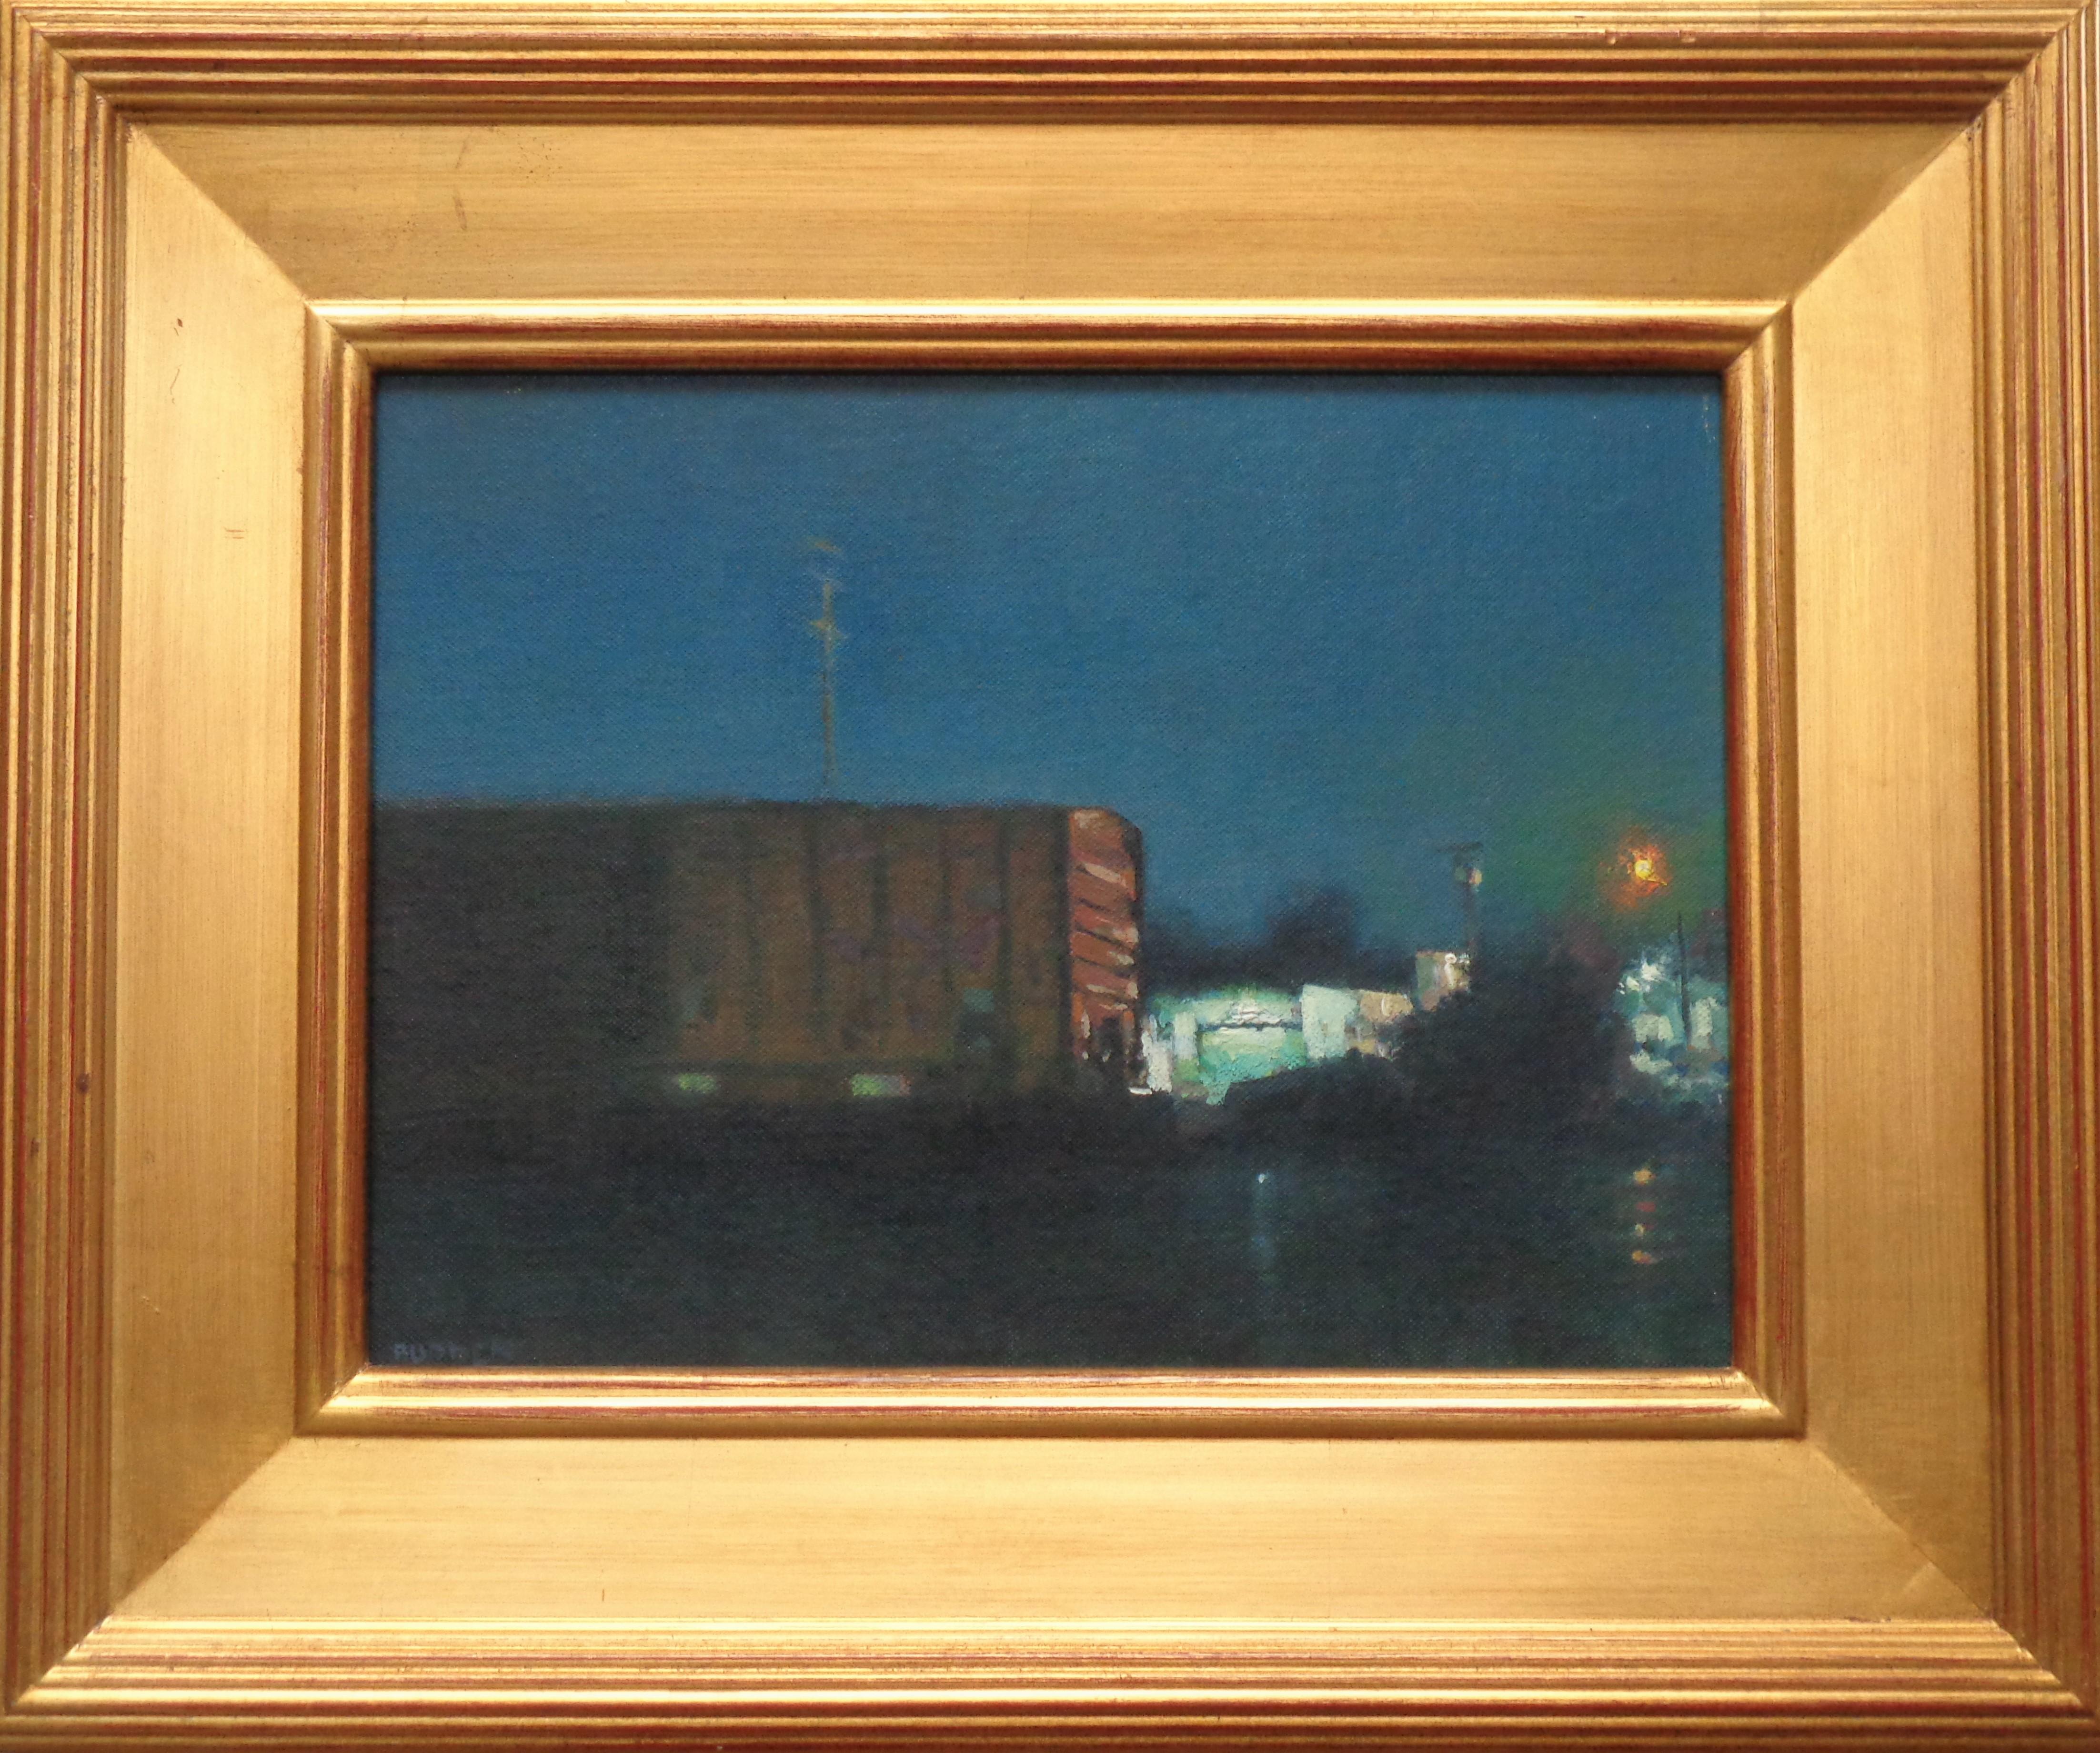 Evening Boxcar, one of three train paintings listed, is an impressionistic landscape plein air oil painting on canvas panel that showcases a beautiful early summer scene featuring  a train that ran near my first home I owned. This painting exudes